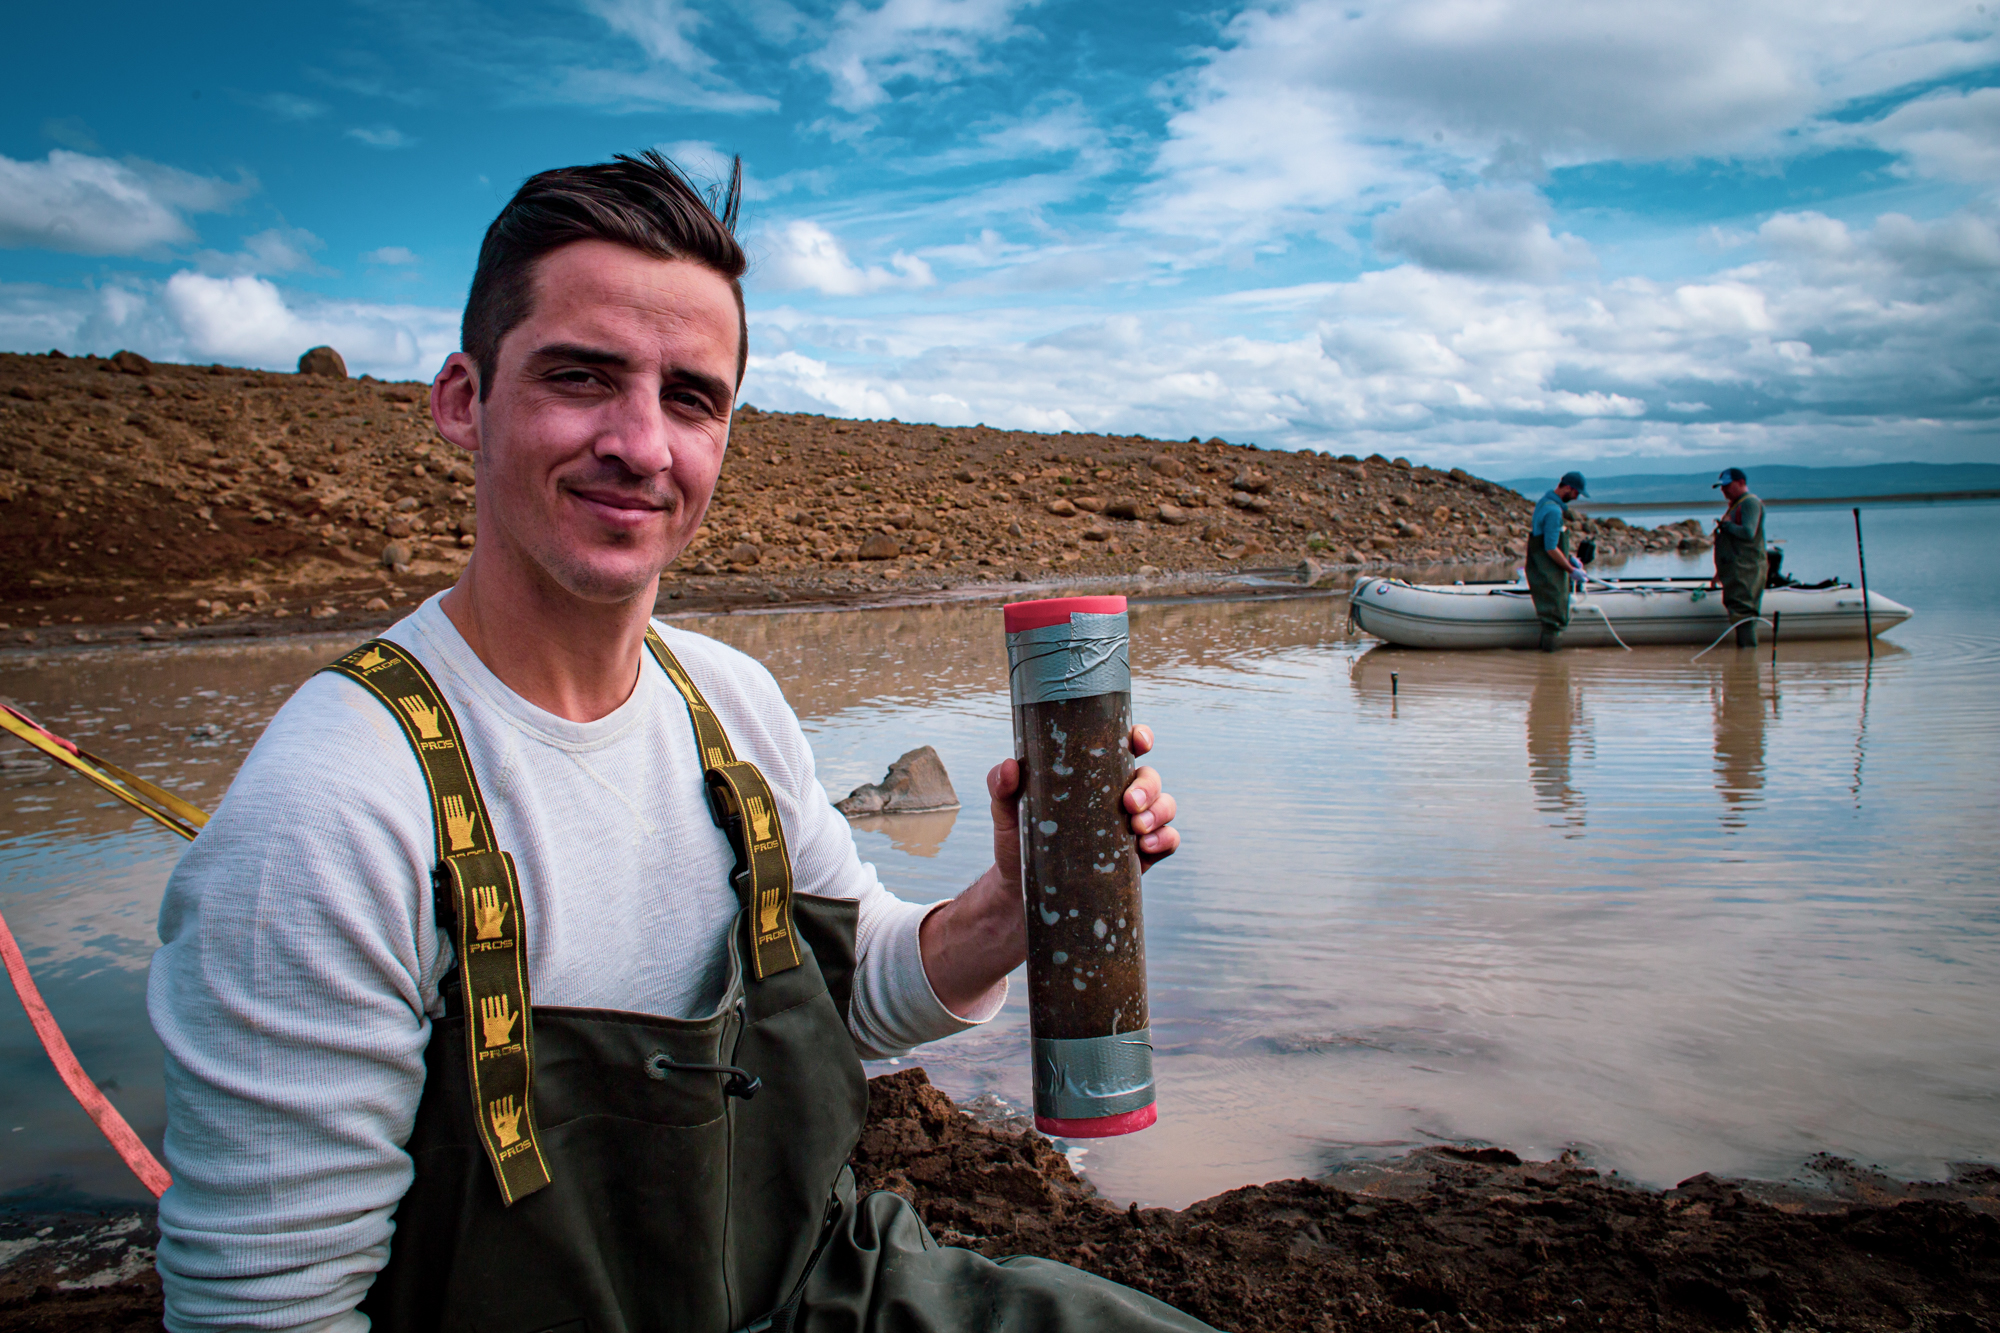 Michael Thorpe, a man with dark hair, poses with a tube of sediment collected from a nearby body of water. He wears a gray sweatshirt underneath dark green waders, or waterproof overalls, and kneels next to a brown lake with clumpy dirt banks in the foreground and background. Two more scientists in waders stand next to a small, flat white boat. The sky is bright blue and mostly covered with puffy clouds.